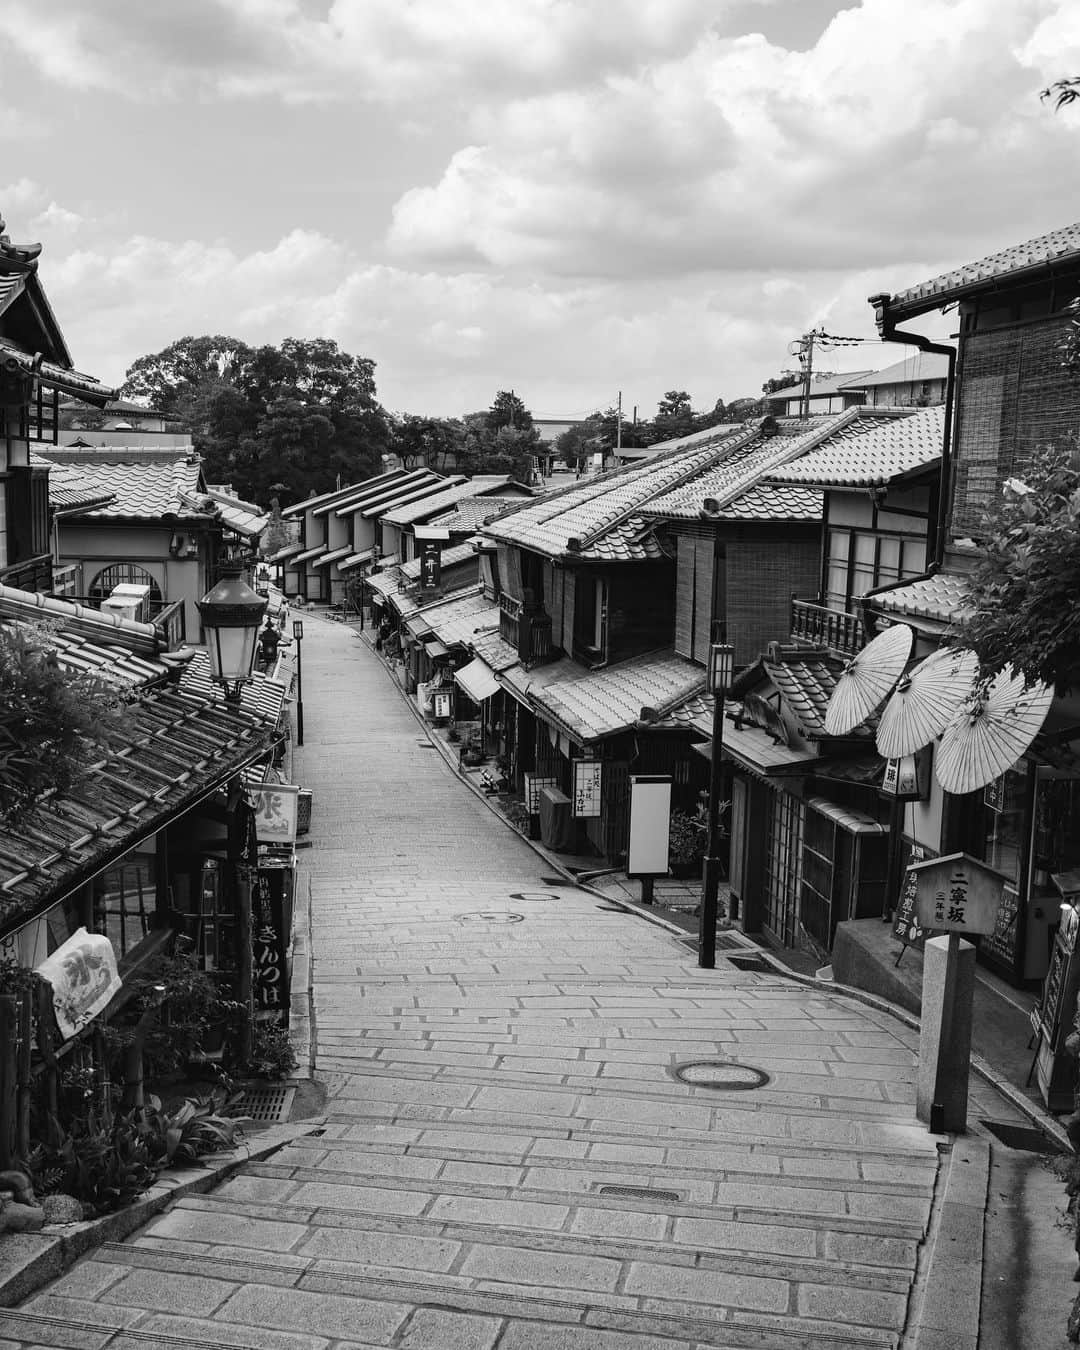 Ryoyaのインスタグラム：「still nobody. But I’ve got mixed feelings about this. Kyoto is now calmer, quieter and peaceful than ever. I kind of like this.  Camera : #GFX100 Lens : #GF45mm Film simulation : #Acros  #Kyoto #Japan #京都」